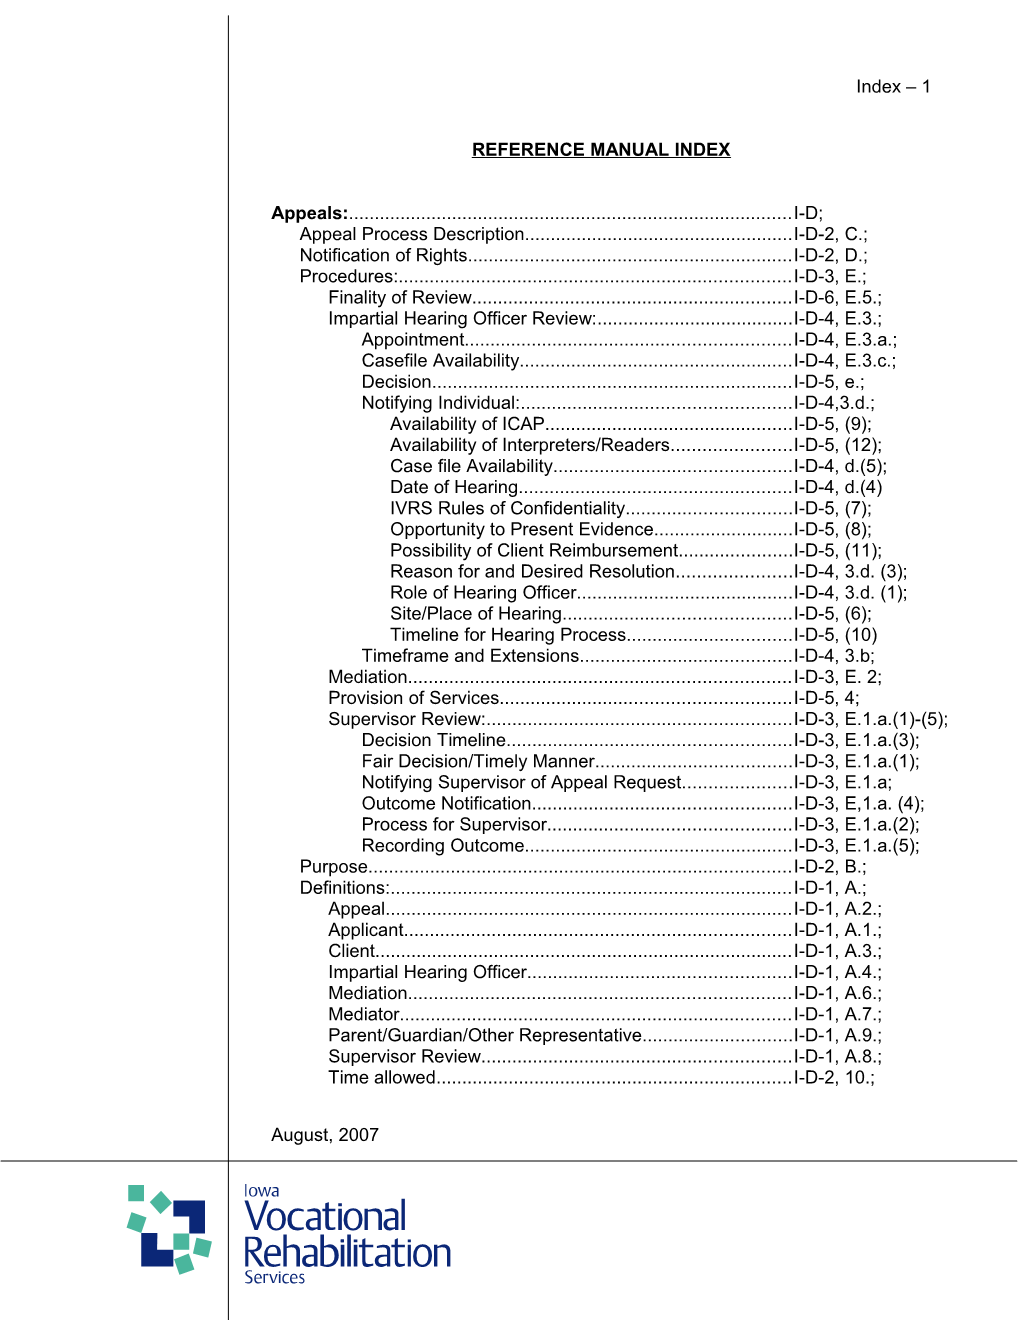 Reference Manual Index